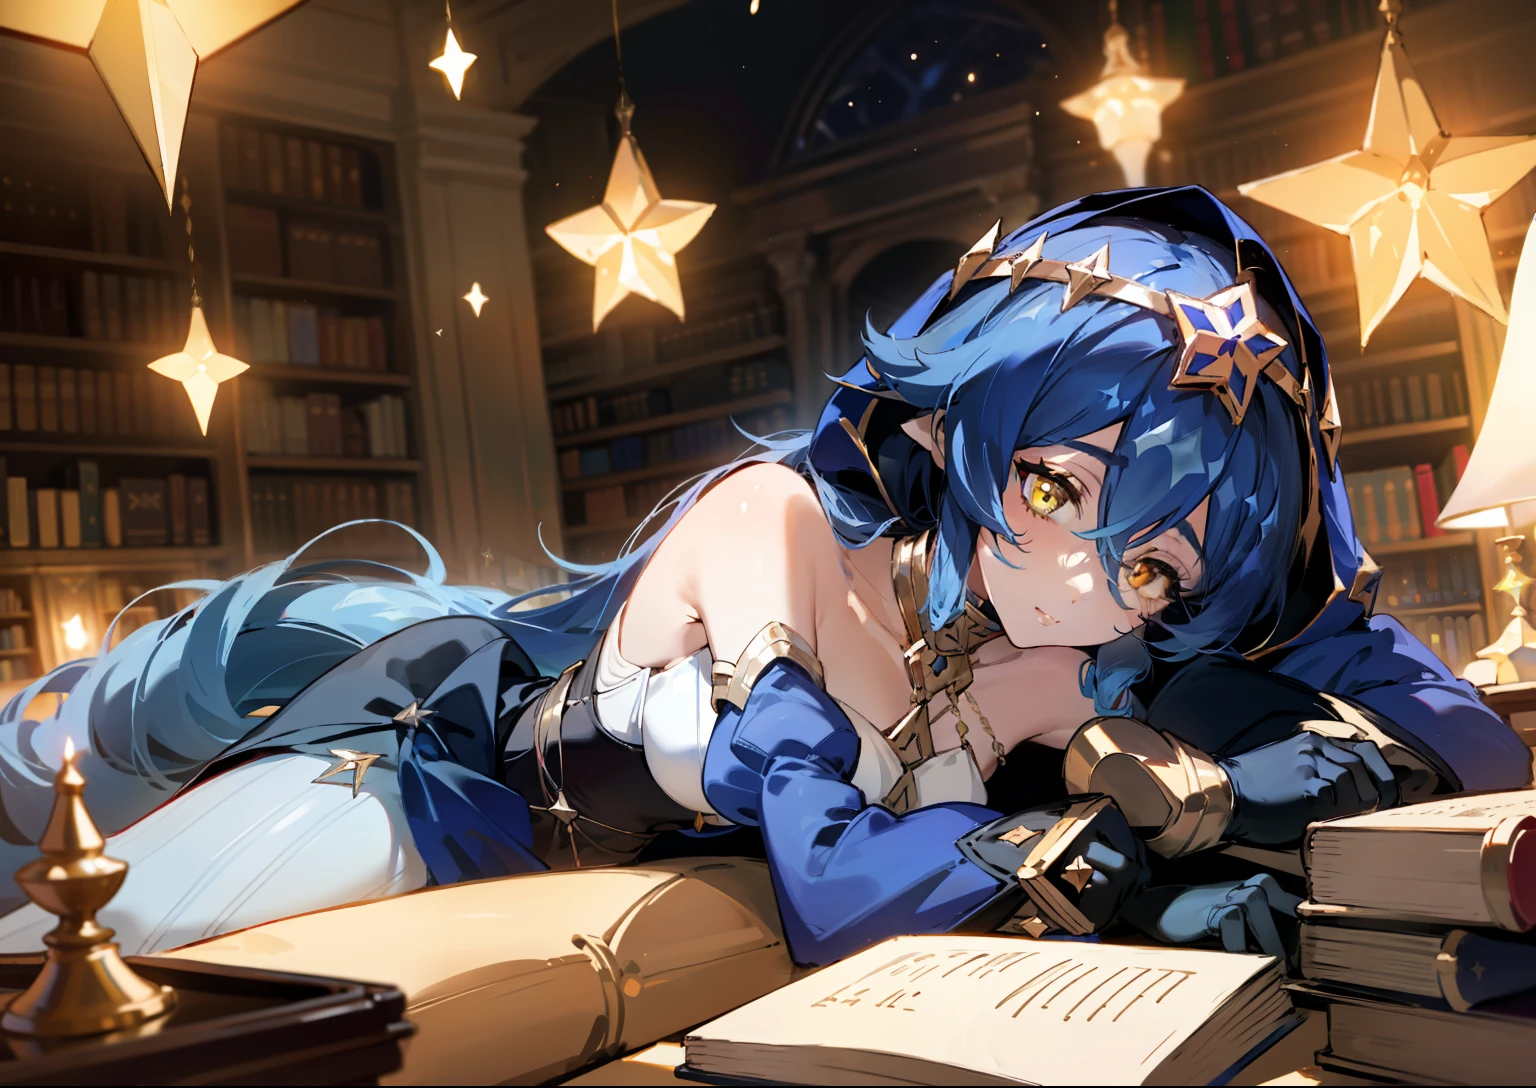 (1girl), illustration, Layla \(Genshin Impact\), choker, star \(symbol\), golden eyes, yellow eyes, glowing eyes, eyes with stars, earrings, gold jewelry, blue skirt, blue dress, white stockings, amazing body, sexy, laying down, lying down, lying on back, laying on back, comfortable, radiance, reading book, book, library, night, candle light, warm lighting, dynamic perspective, fisheye view